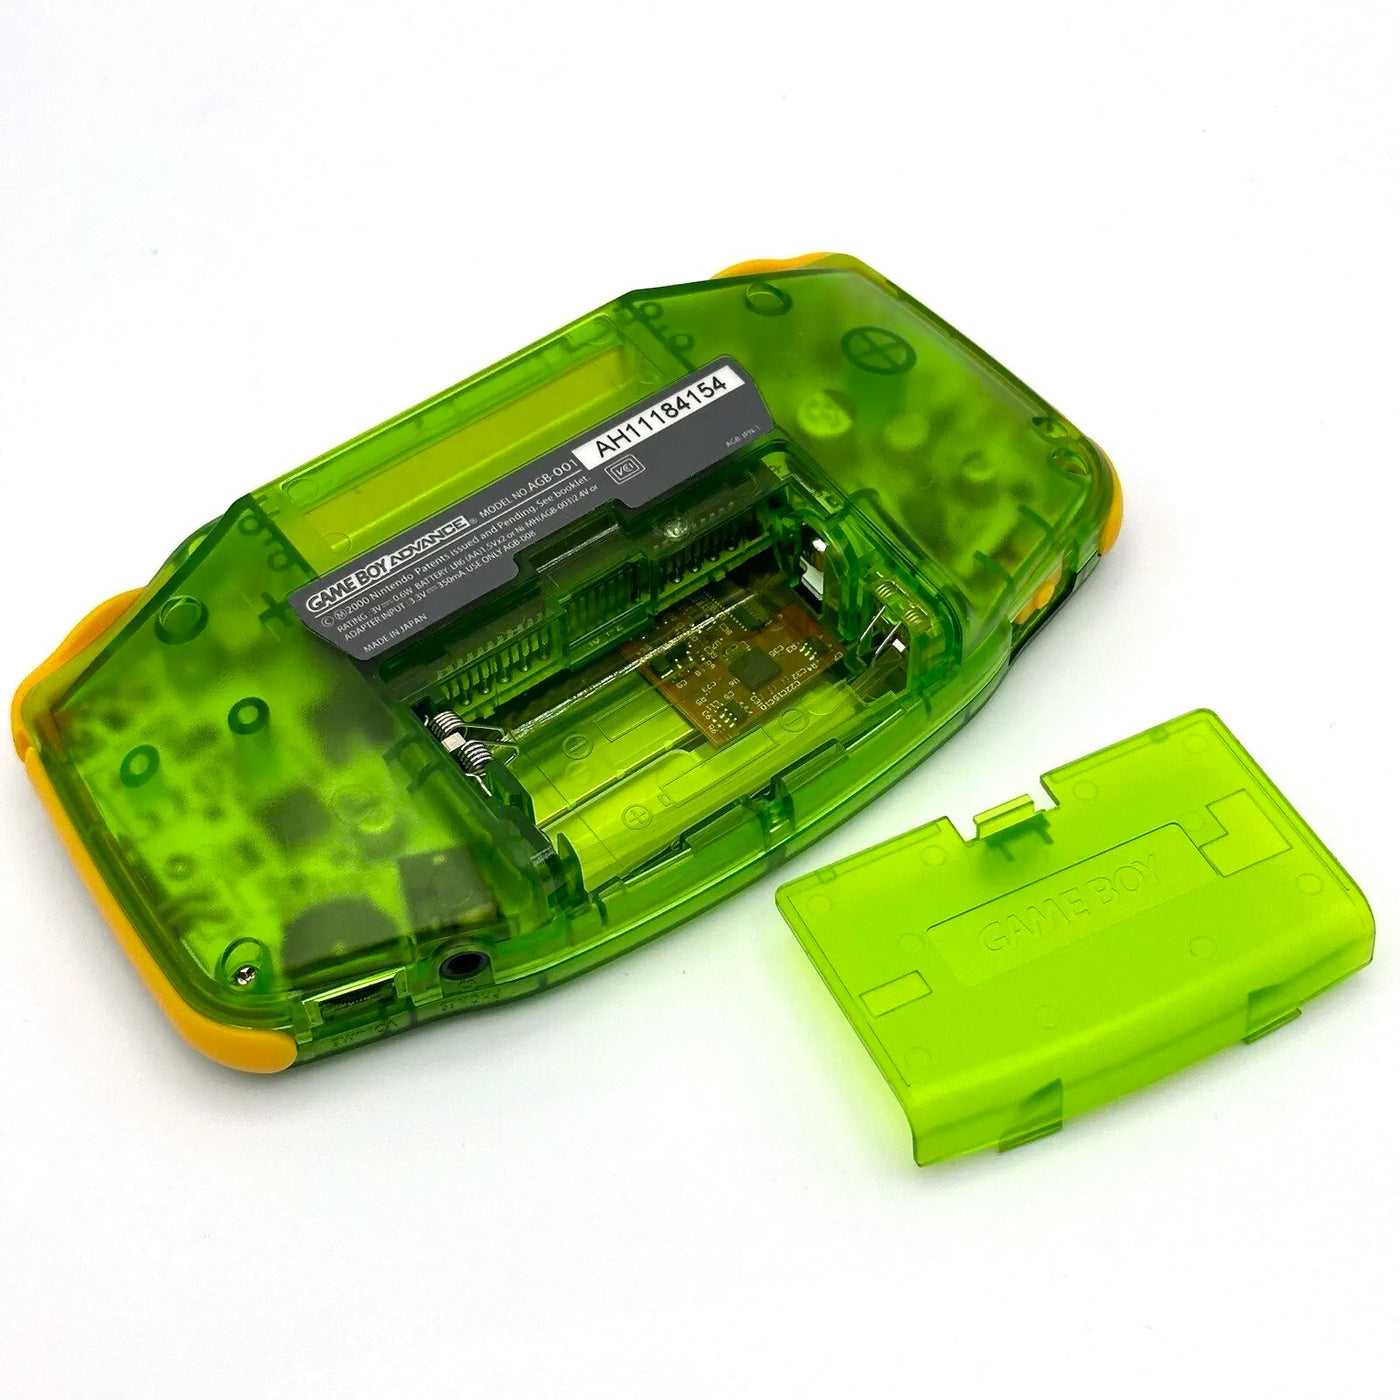 Game Boy Advance IPS V2 Console - Green & Yellow